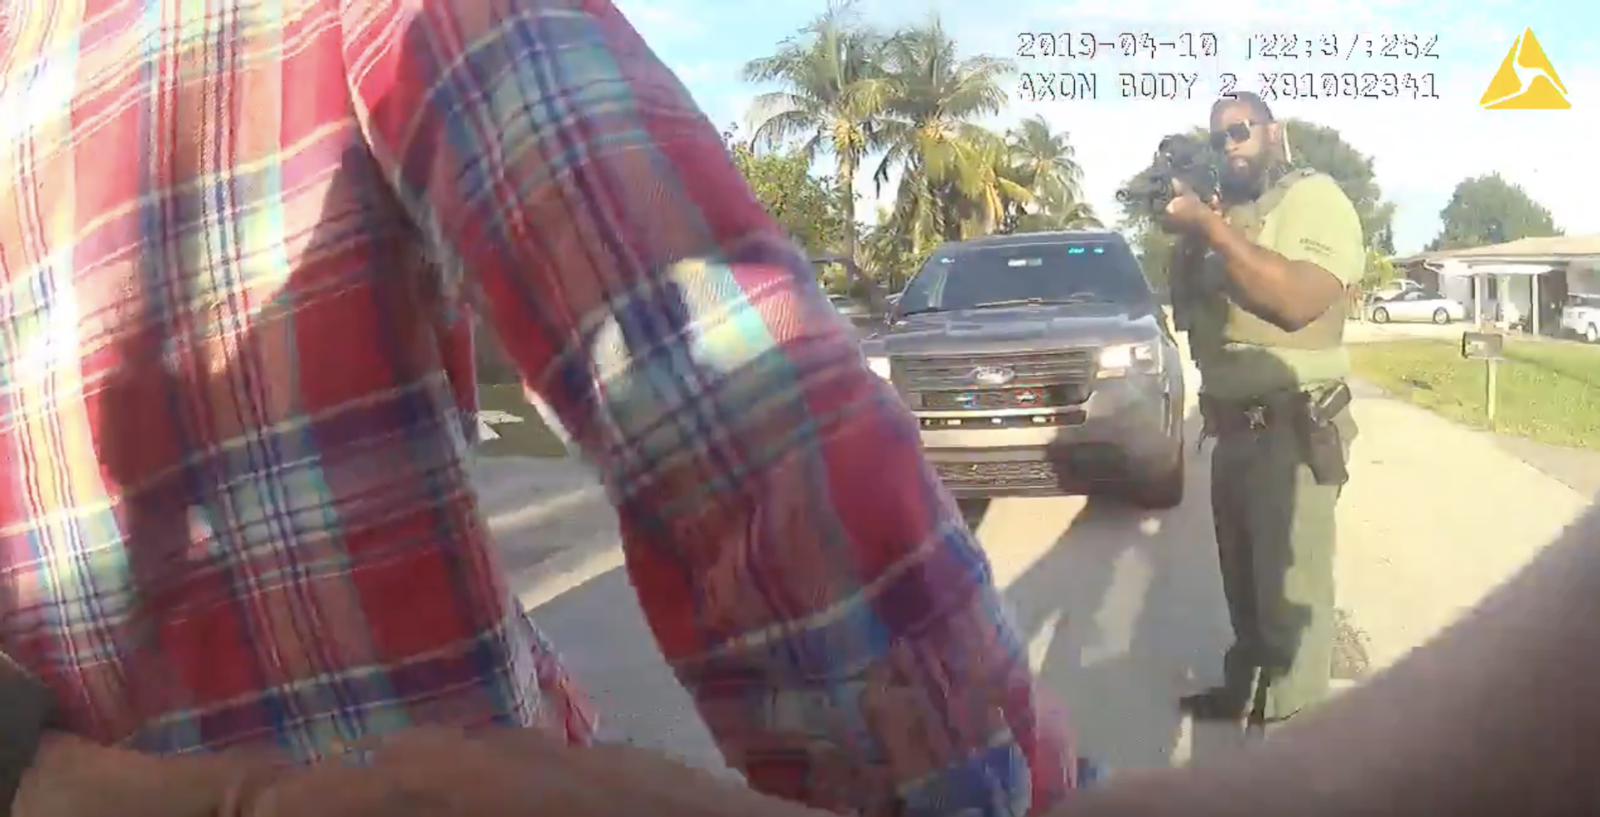 Up in Arms: When Self-Defense During a Trespassing Turns into a Gunpoint Arrest in Pompano Beach. Fort Lauderdale Criminal Defense Attorneys share BSO Body Camera footage.